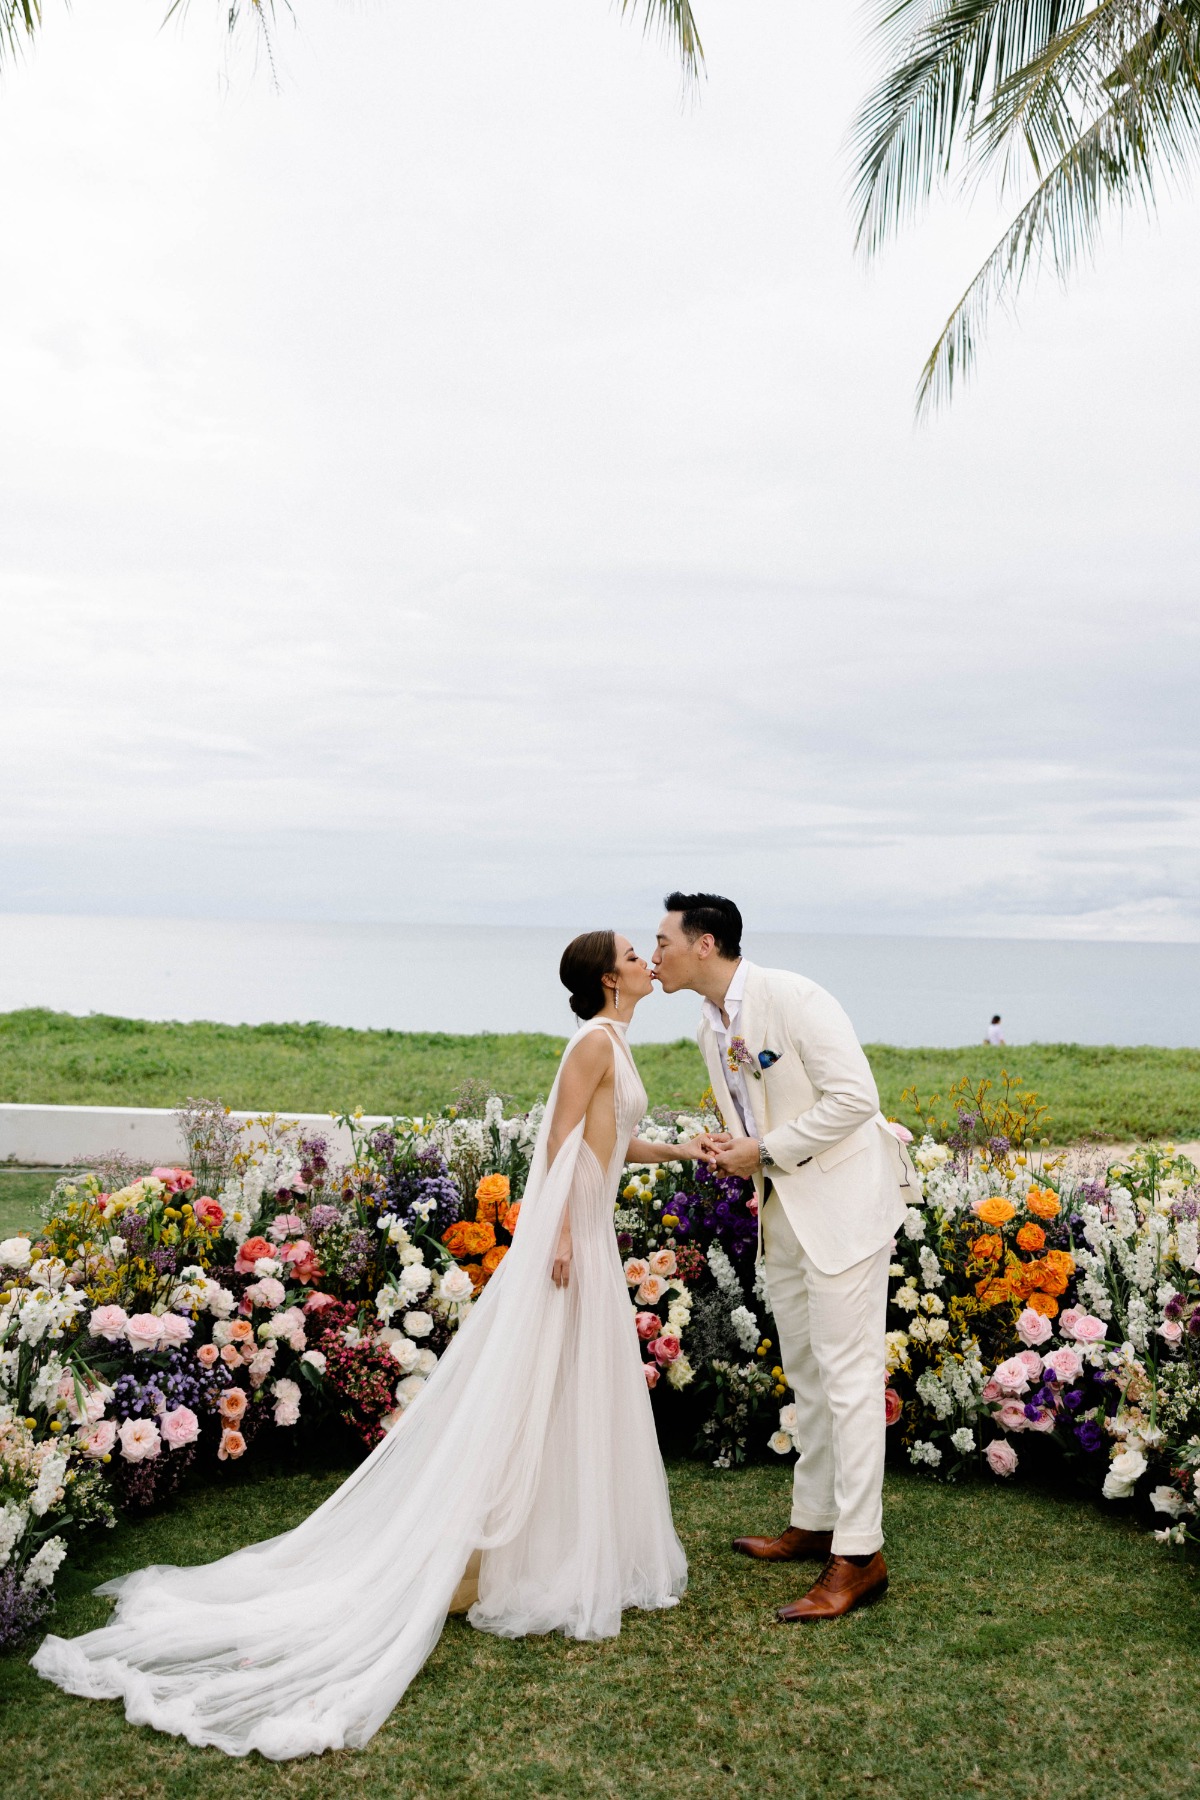 First kiss at vibrant floral ceremony